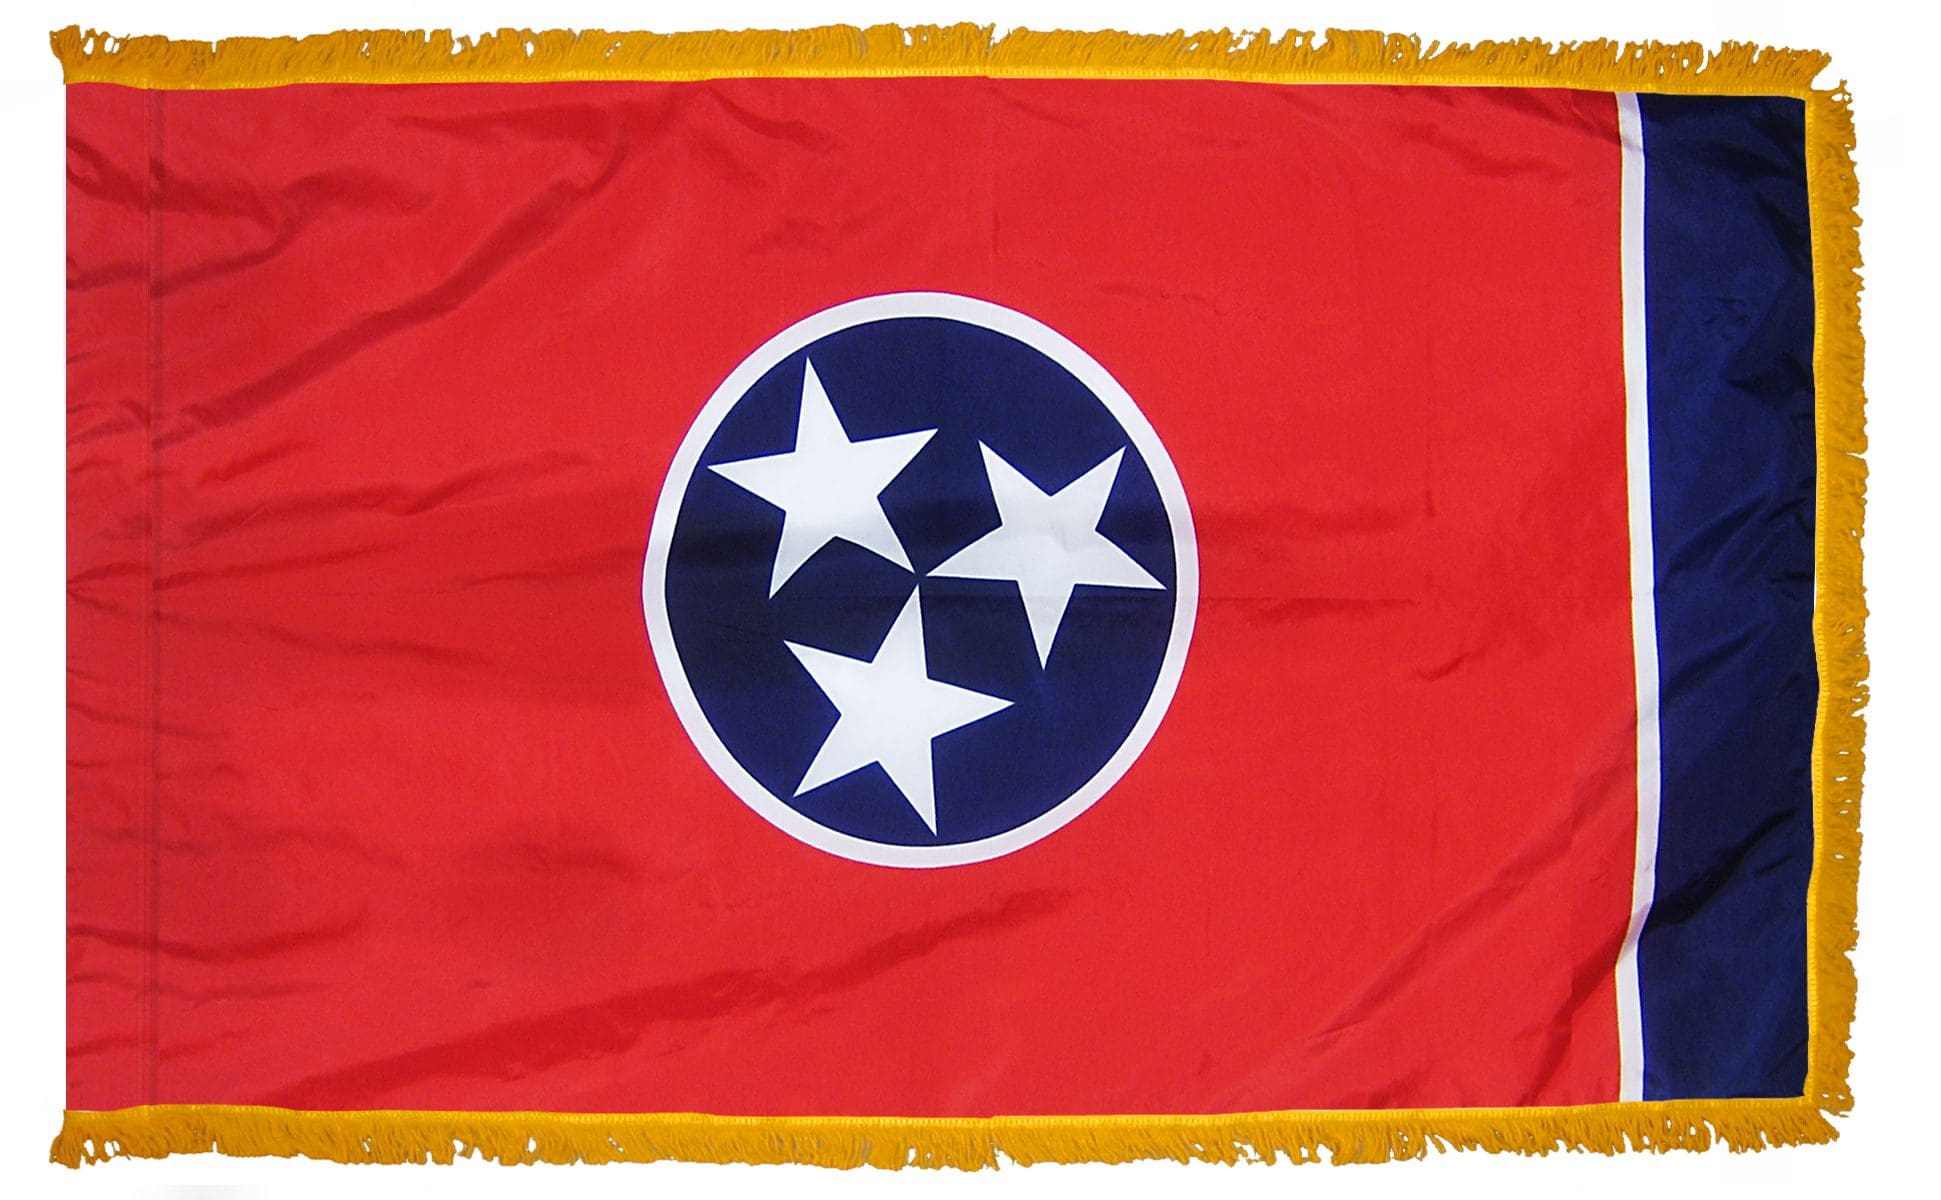 Tennessee State Flag 3x5 or 4x6 ft. (fringed)